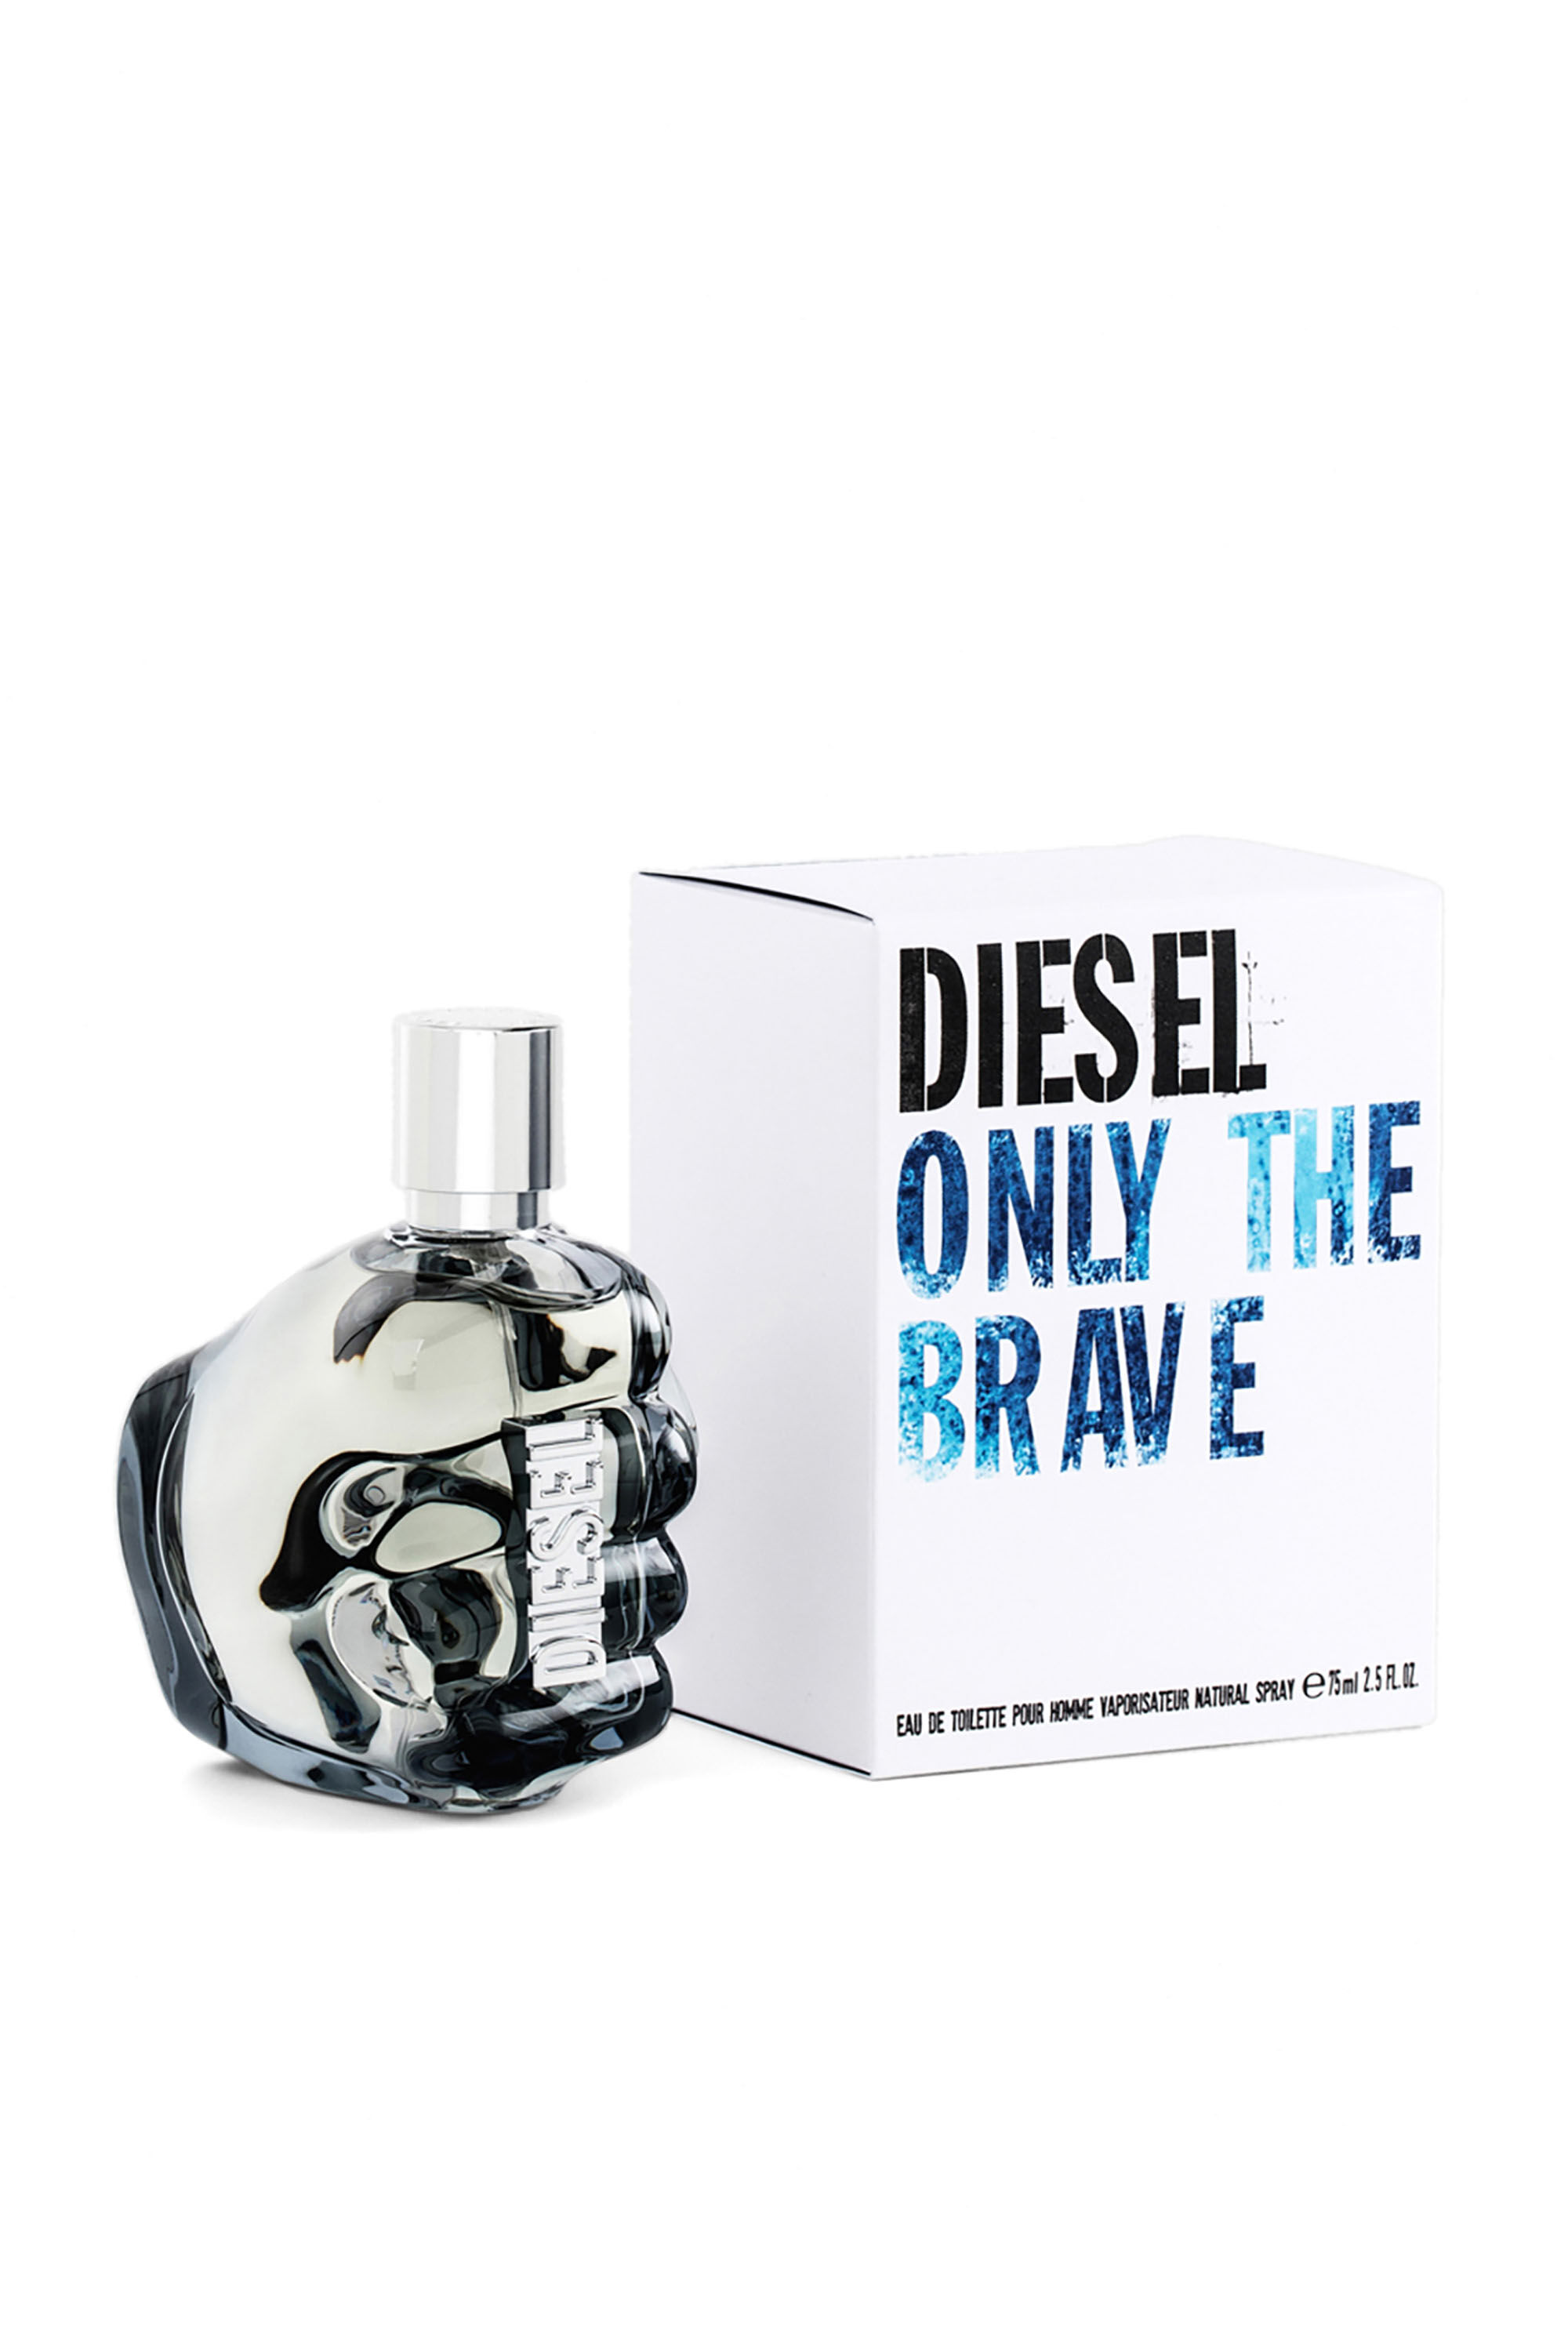 Diesel - ONLY THE BRAVE 75ML , Male Only The Brave 75ml, 2.5 FL.OZ., Eau de Toilette in White - Image 3